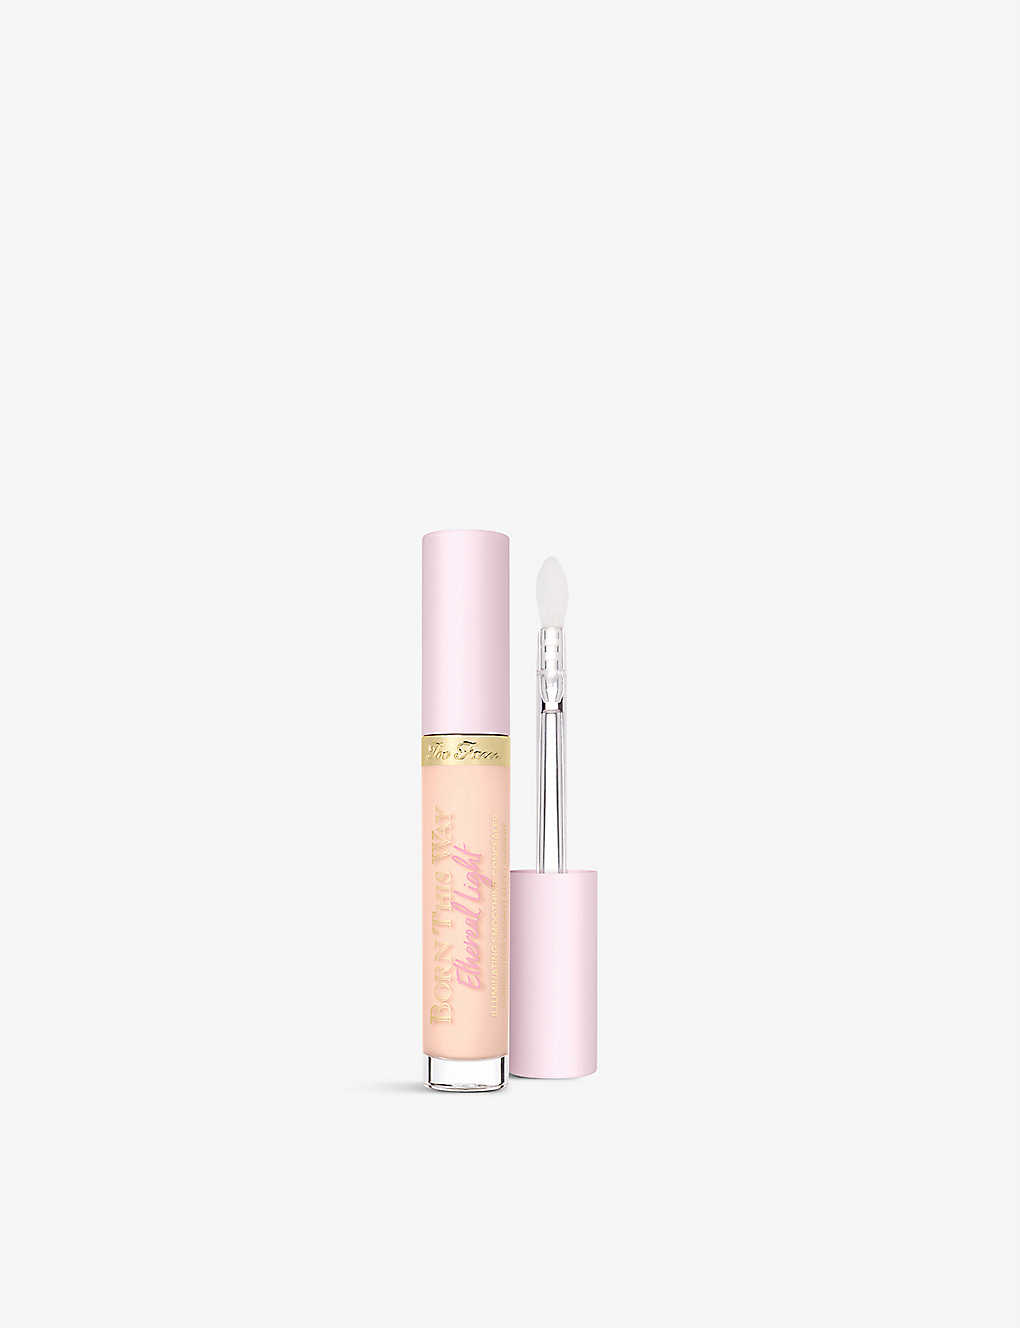 Too Faced Oatmeal Born This Way Ethereal Light Illuminating Smoothing Concealer 5ml In Pink